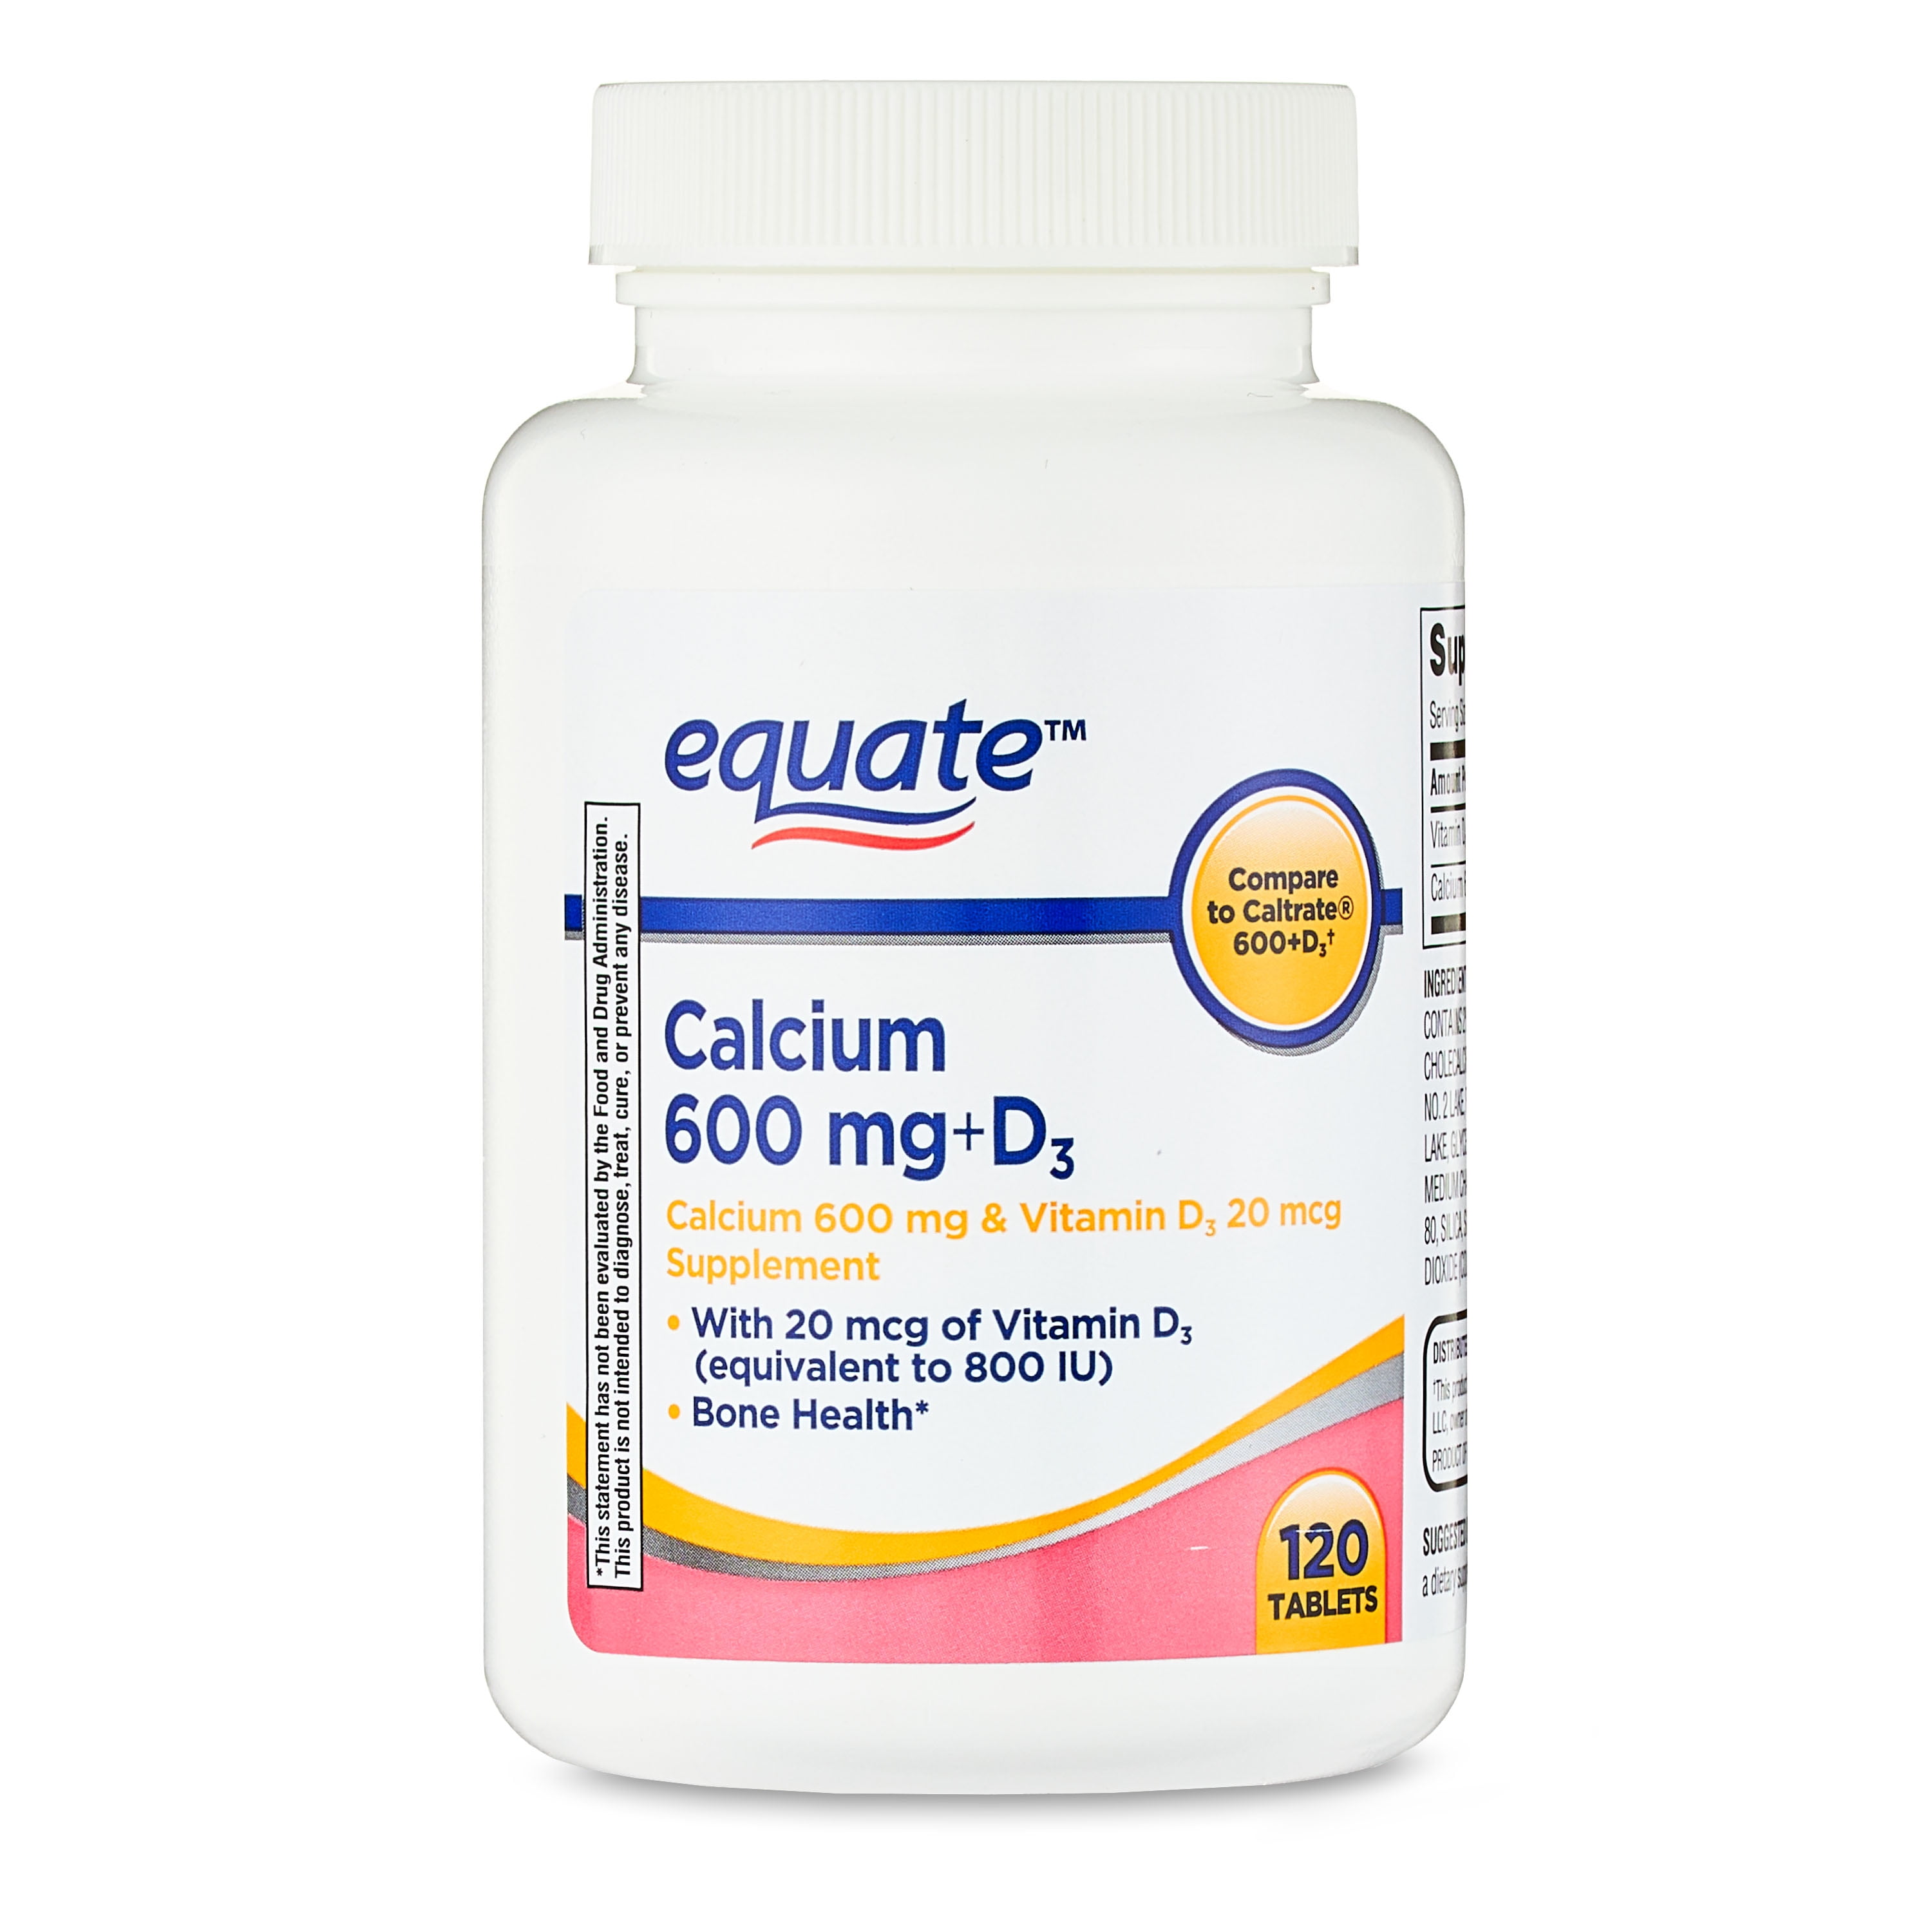 NOW Supplements, Calcium Carbonate Powder, High Percentage of Calcium,  Supports Bone Health* 12-Ounce